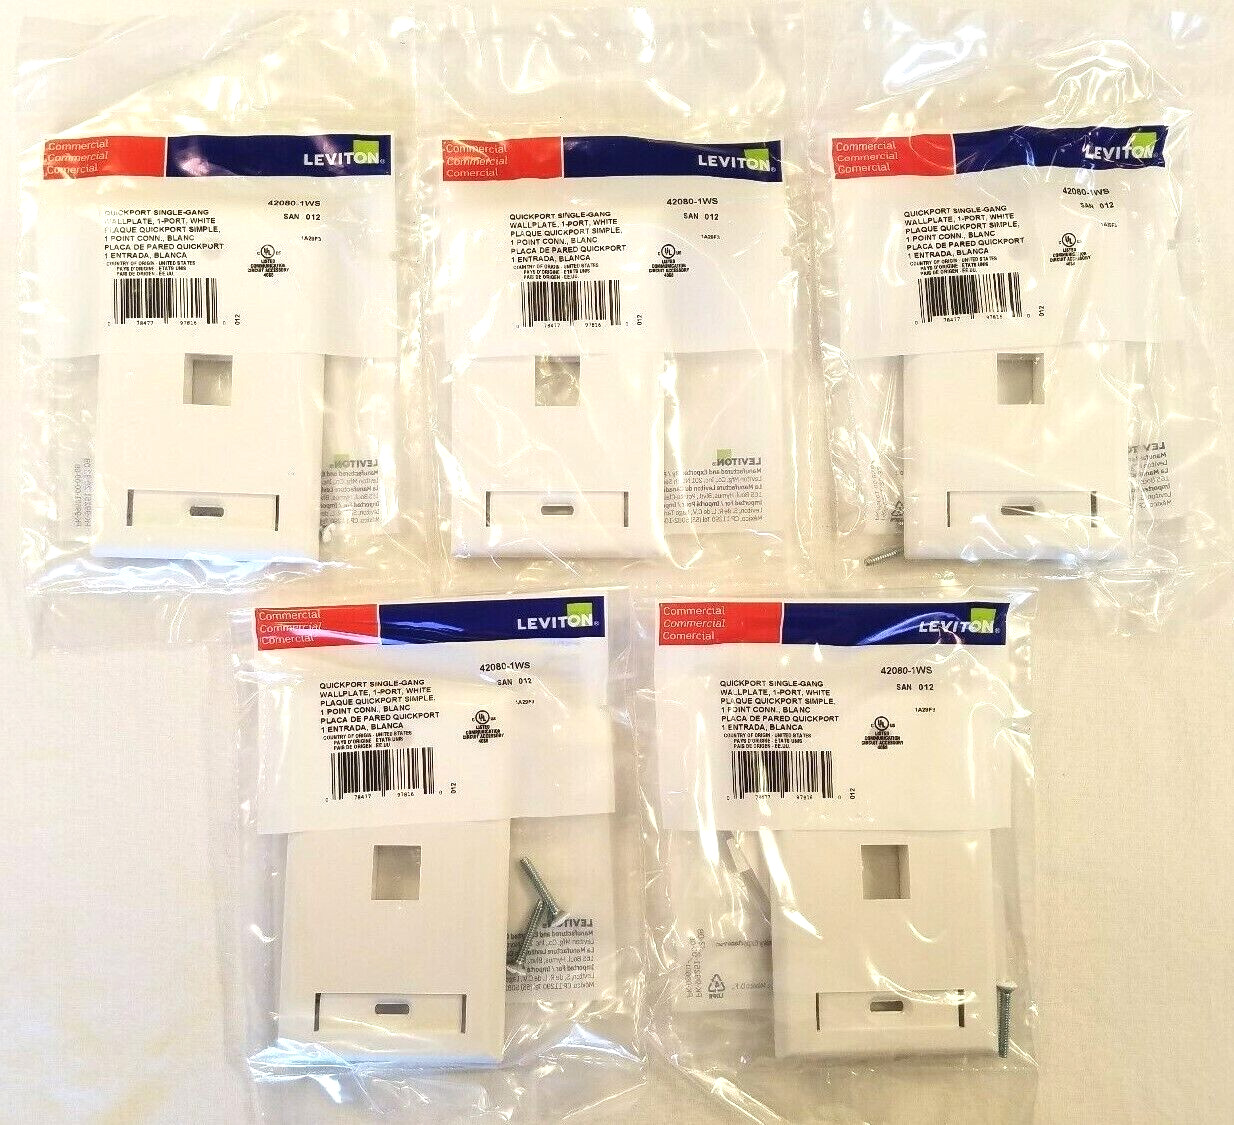 42080-1WS 1-Port 1-Gang QuickPort Wallplate with ID Window - White - 5 PACK